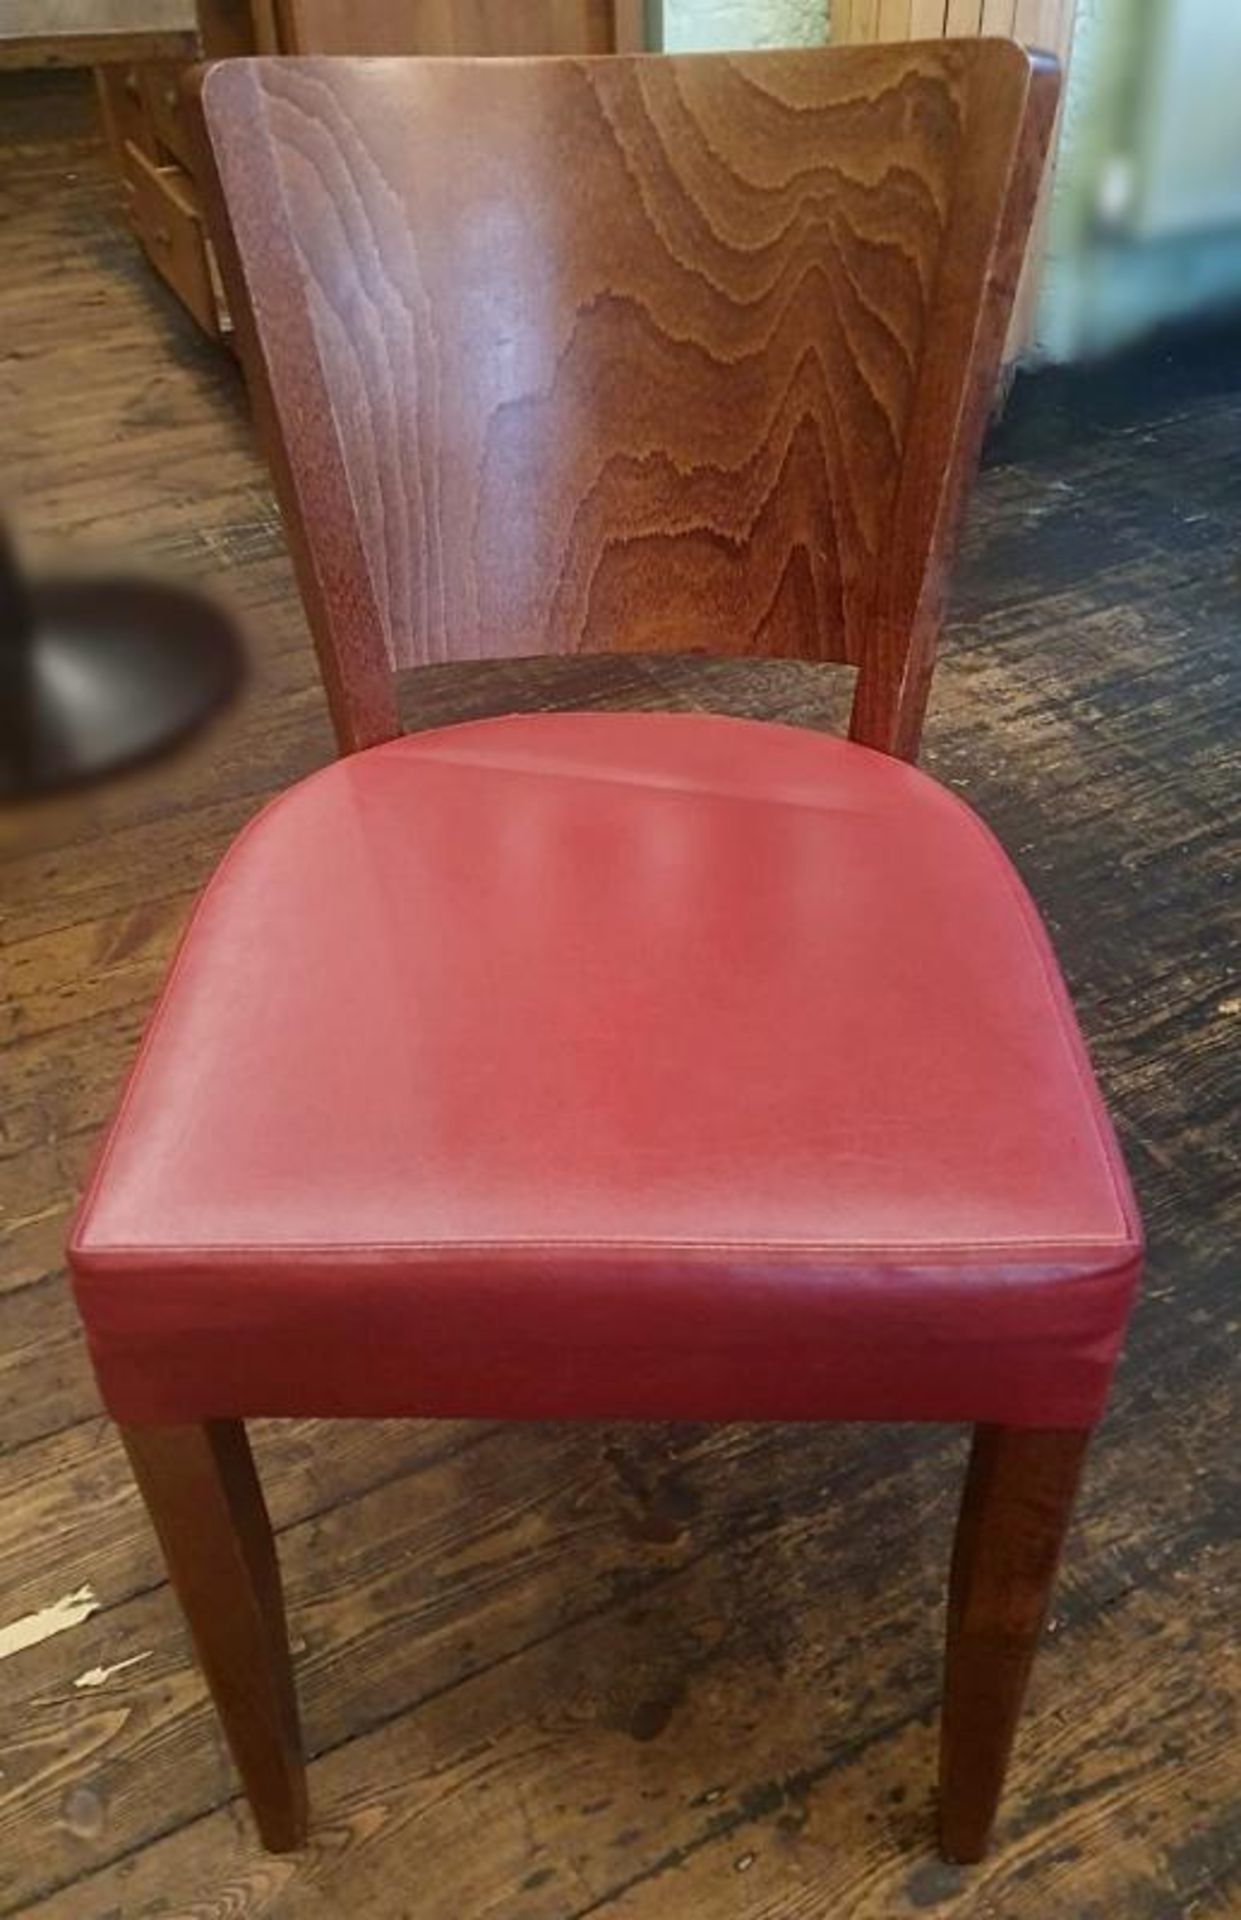 6 x Wooden Dining Chairs With Upholstered Seat Cushions In Red - Recently Taken From A Contemporary